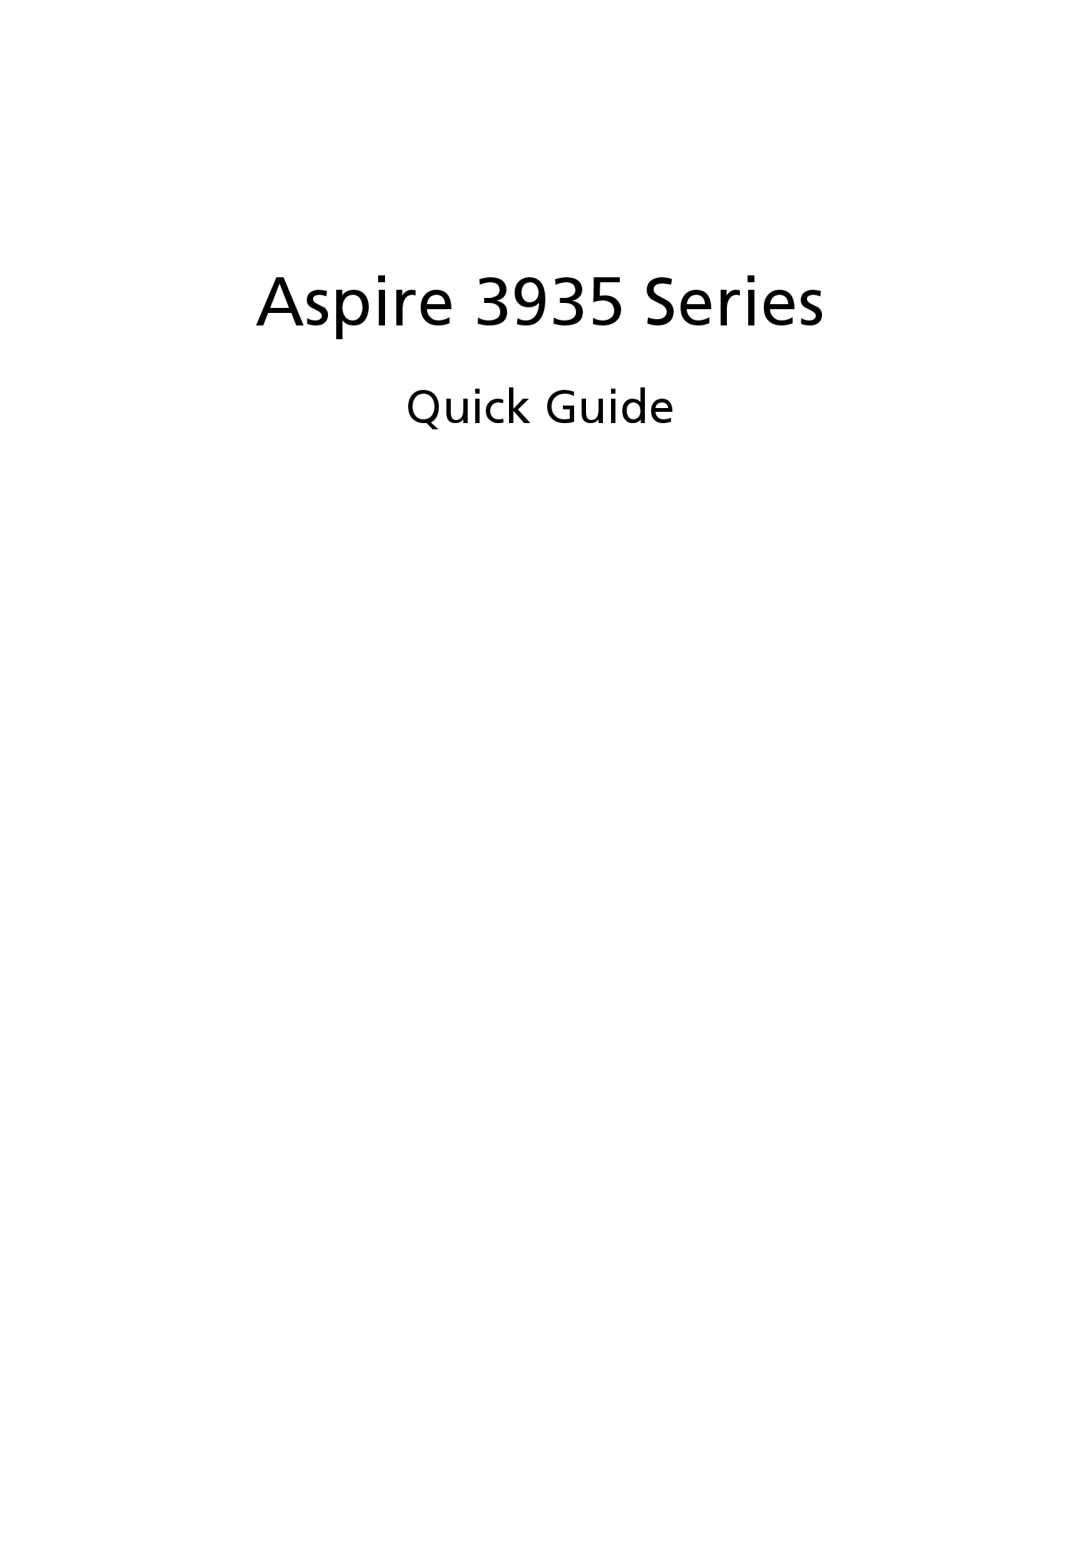 Acer manual Quick Guide, Aspire 3935 Series 